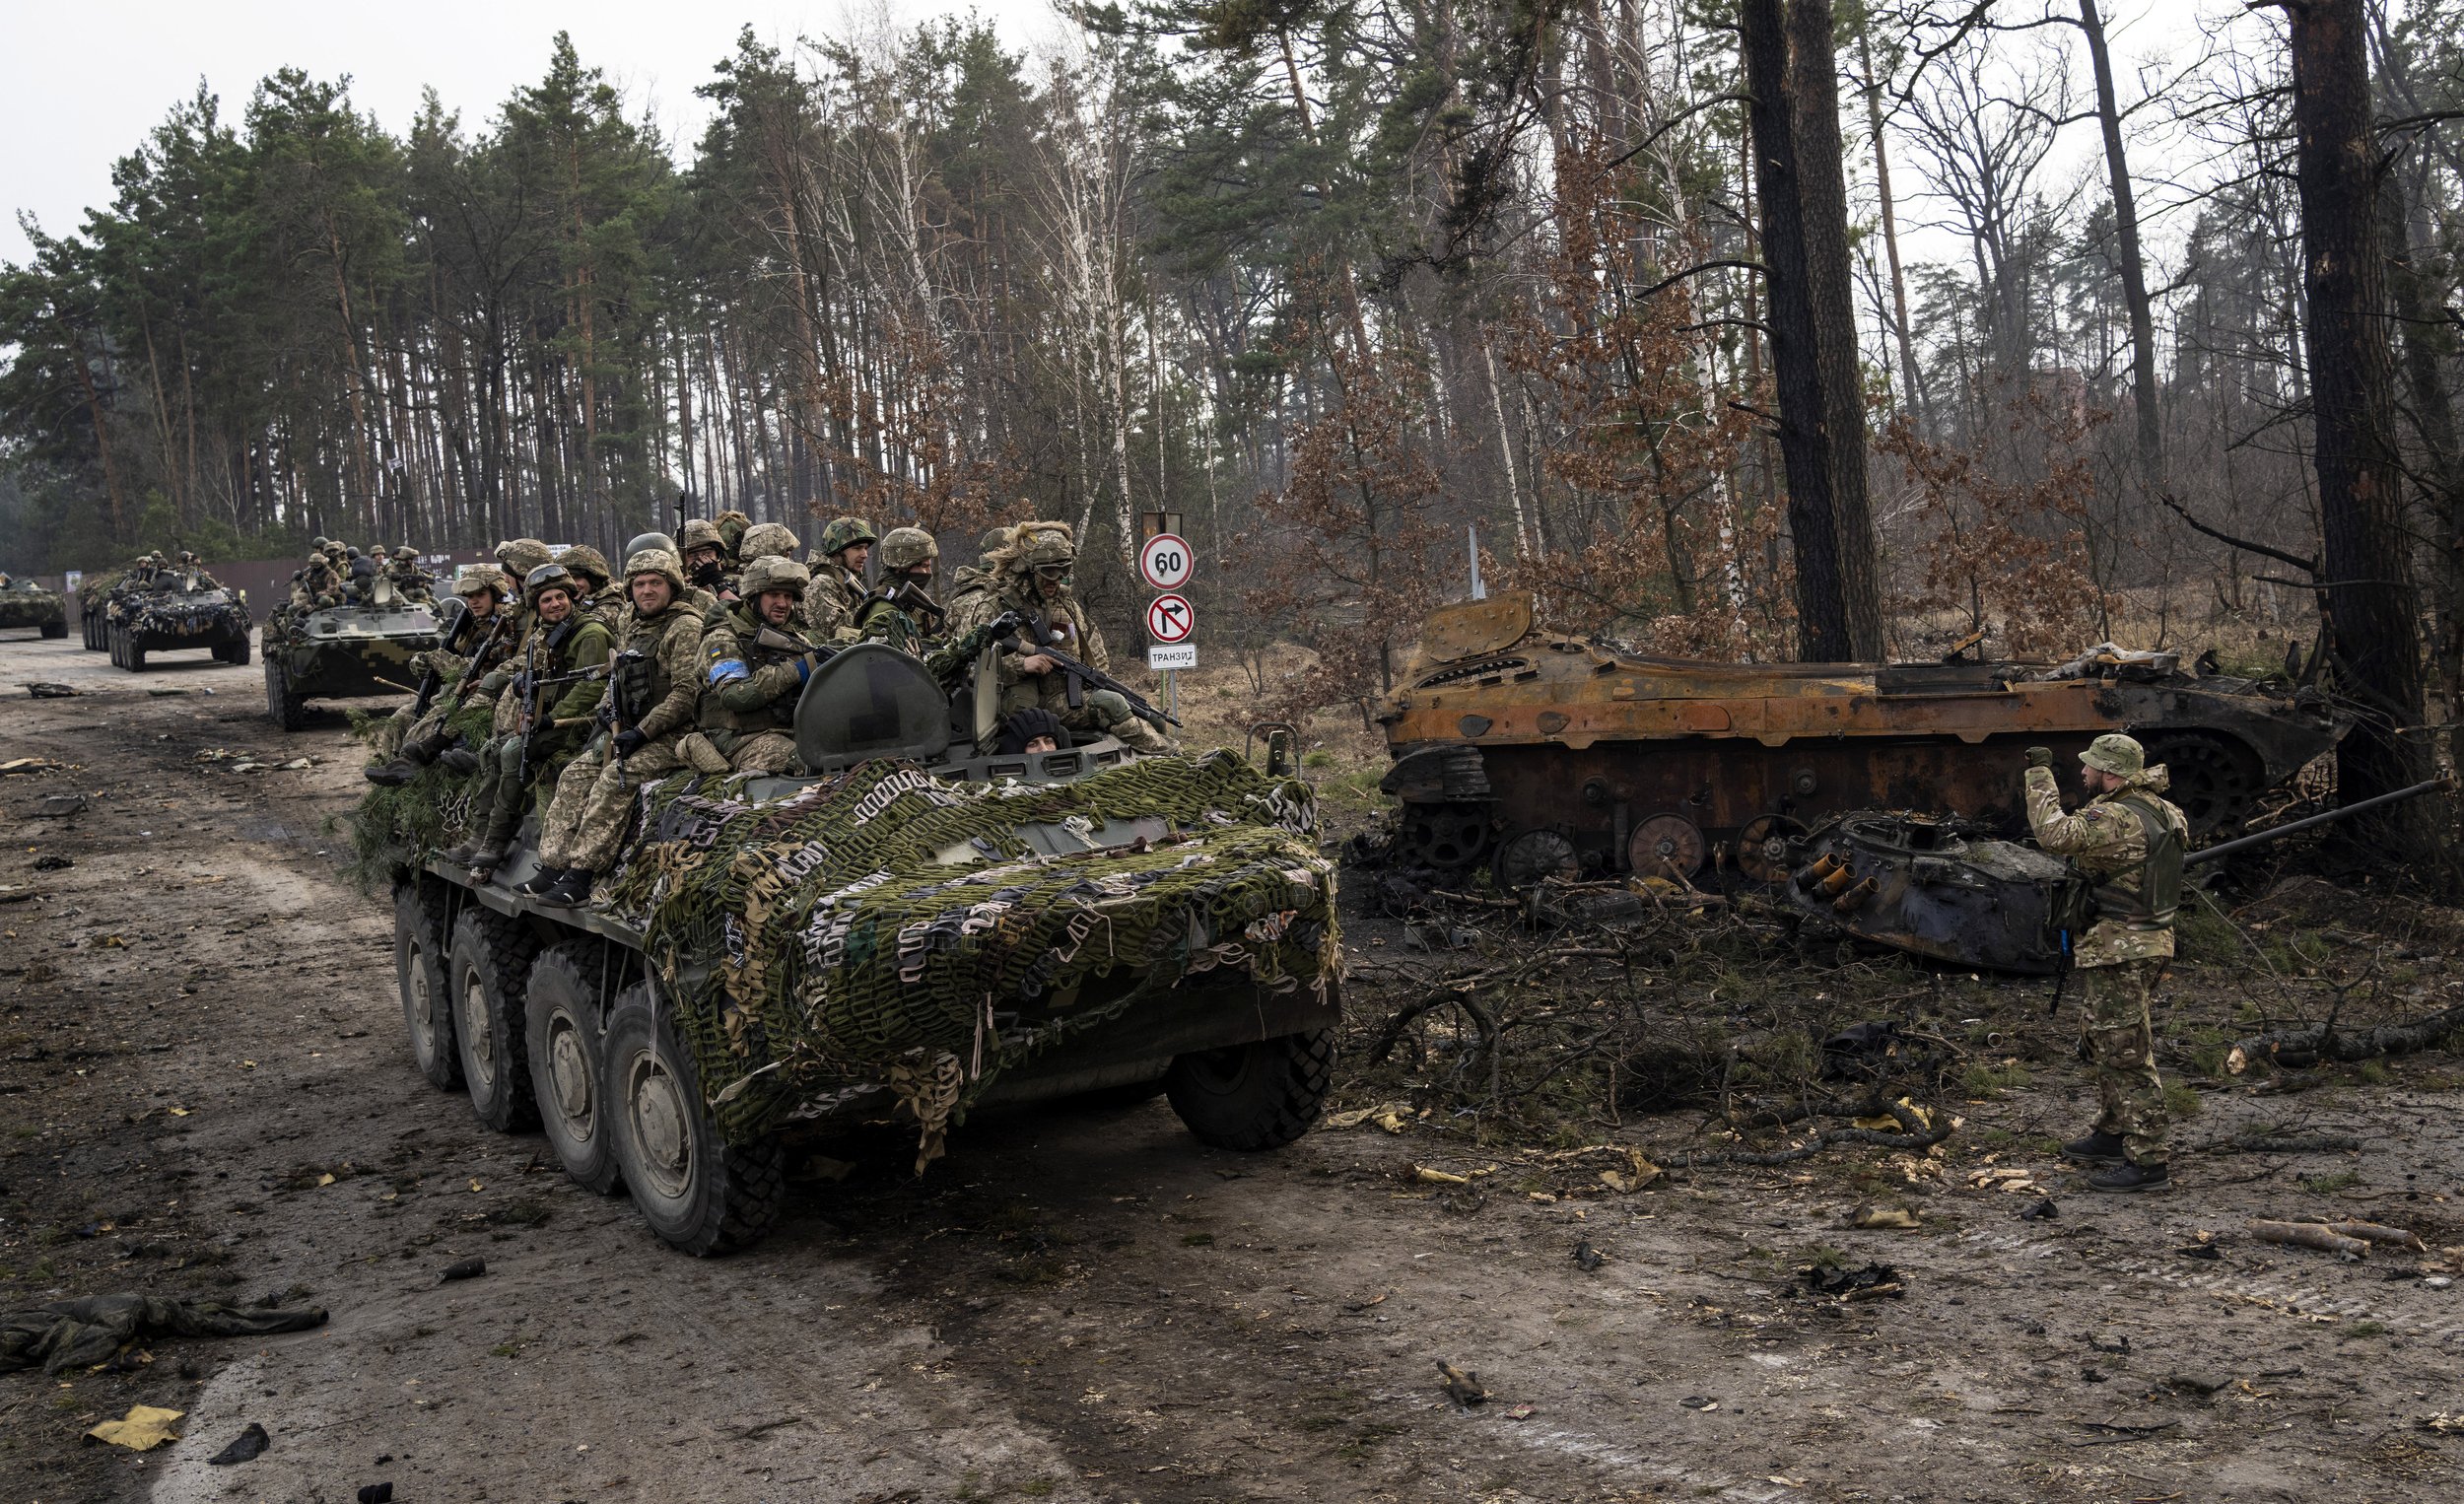  Ukrainian soldiers pass on top of armored vehicles next to a destroyed Russian tank in the outskirts of Kyiv, Ukraine, Thursday, March 31, 2022. (AP Photo/Rodrigo Abd) 